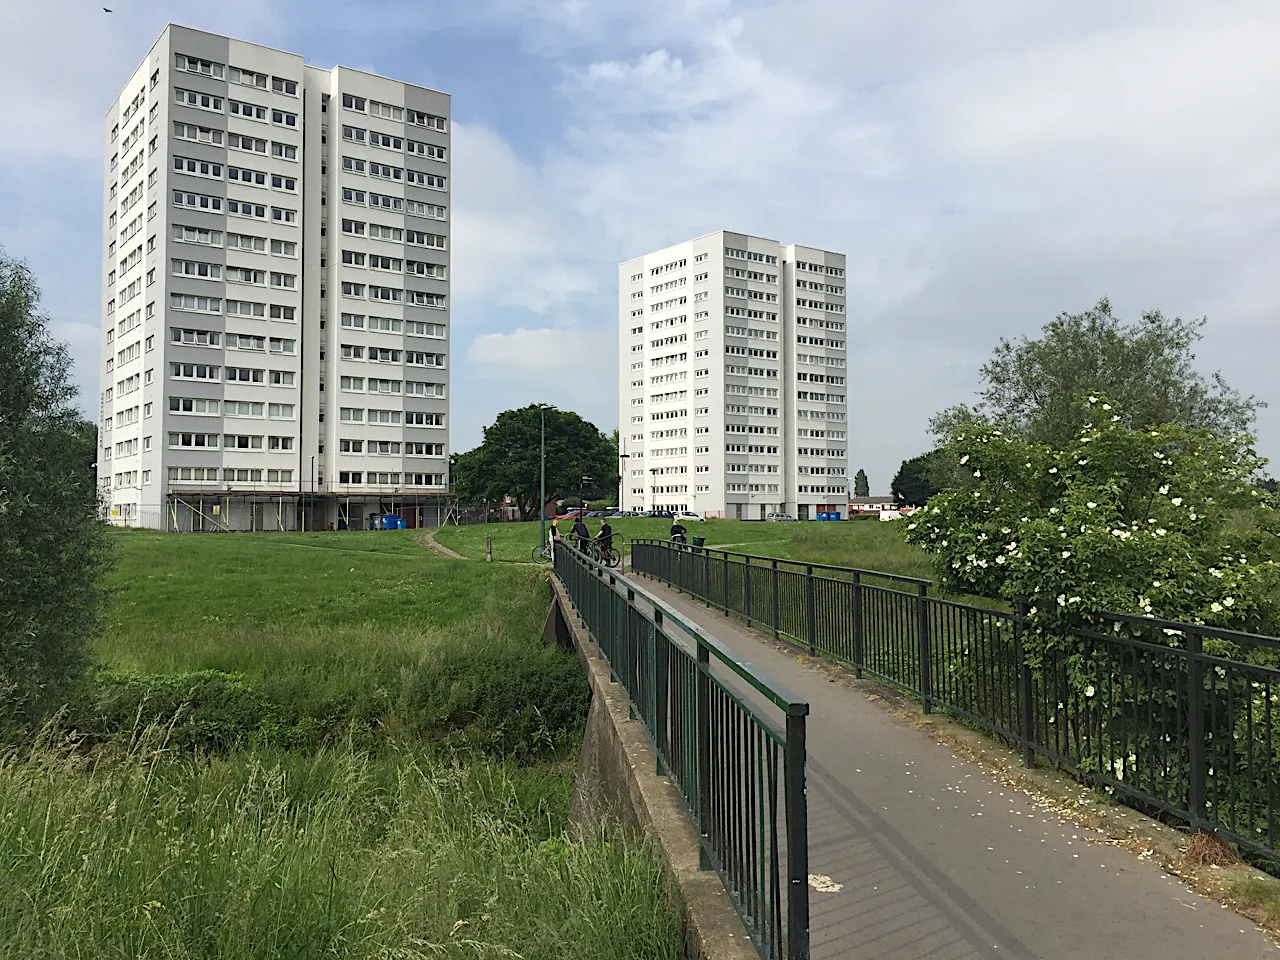 Photo showing: 14-storey blocks of flats overlooking the River Cole, Bacon's End, east Birmingham